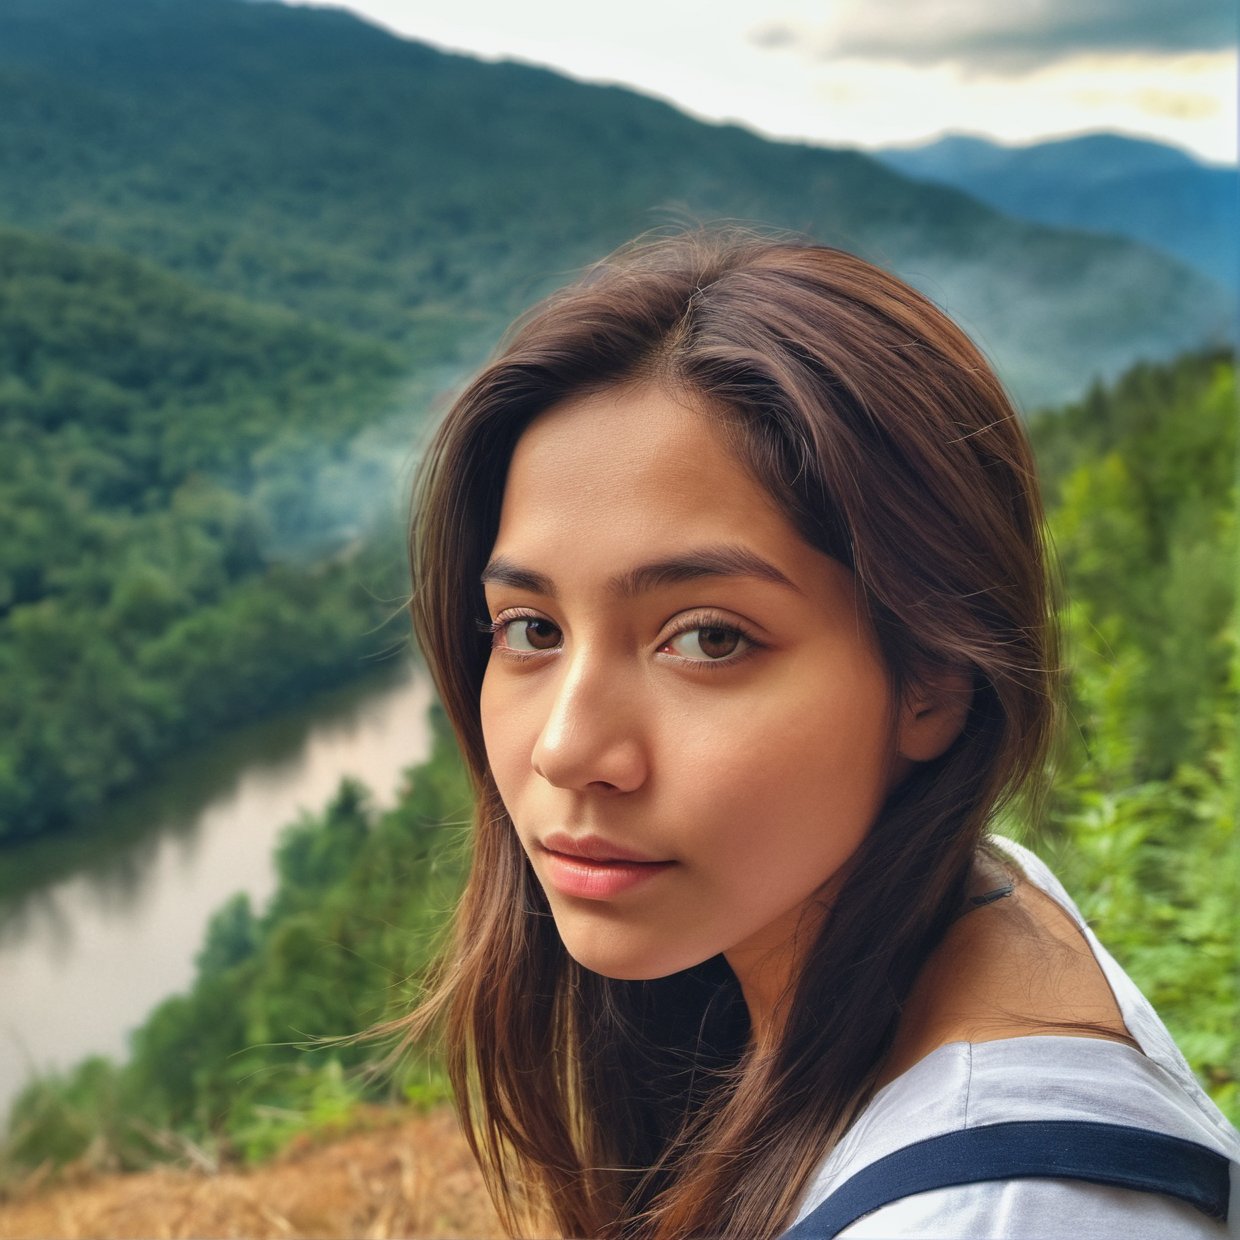 High Resolution, Masterpiece, High Quality, High Definition, Focus on Face of One Young Woman, Human Figure, Overlooking Large Forest from Back, Mountain Landscape, Forest, Nature, River,realistic